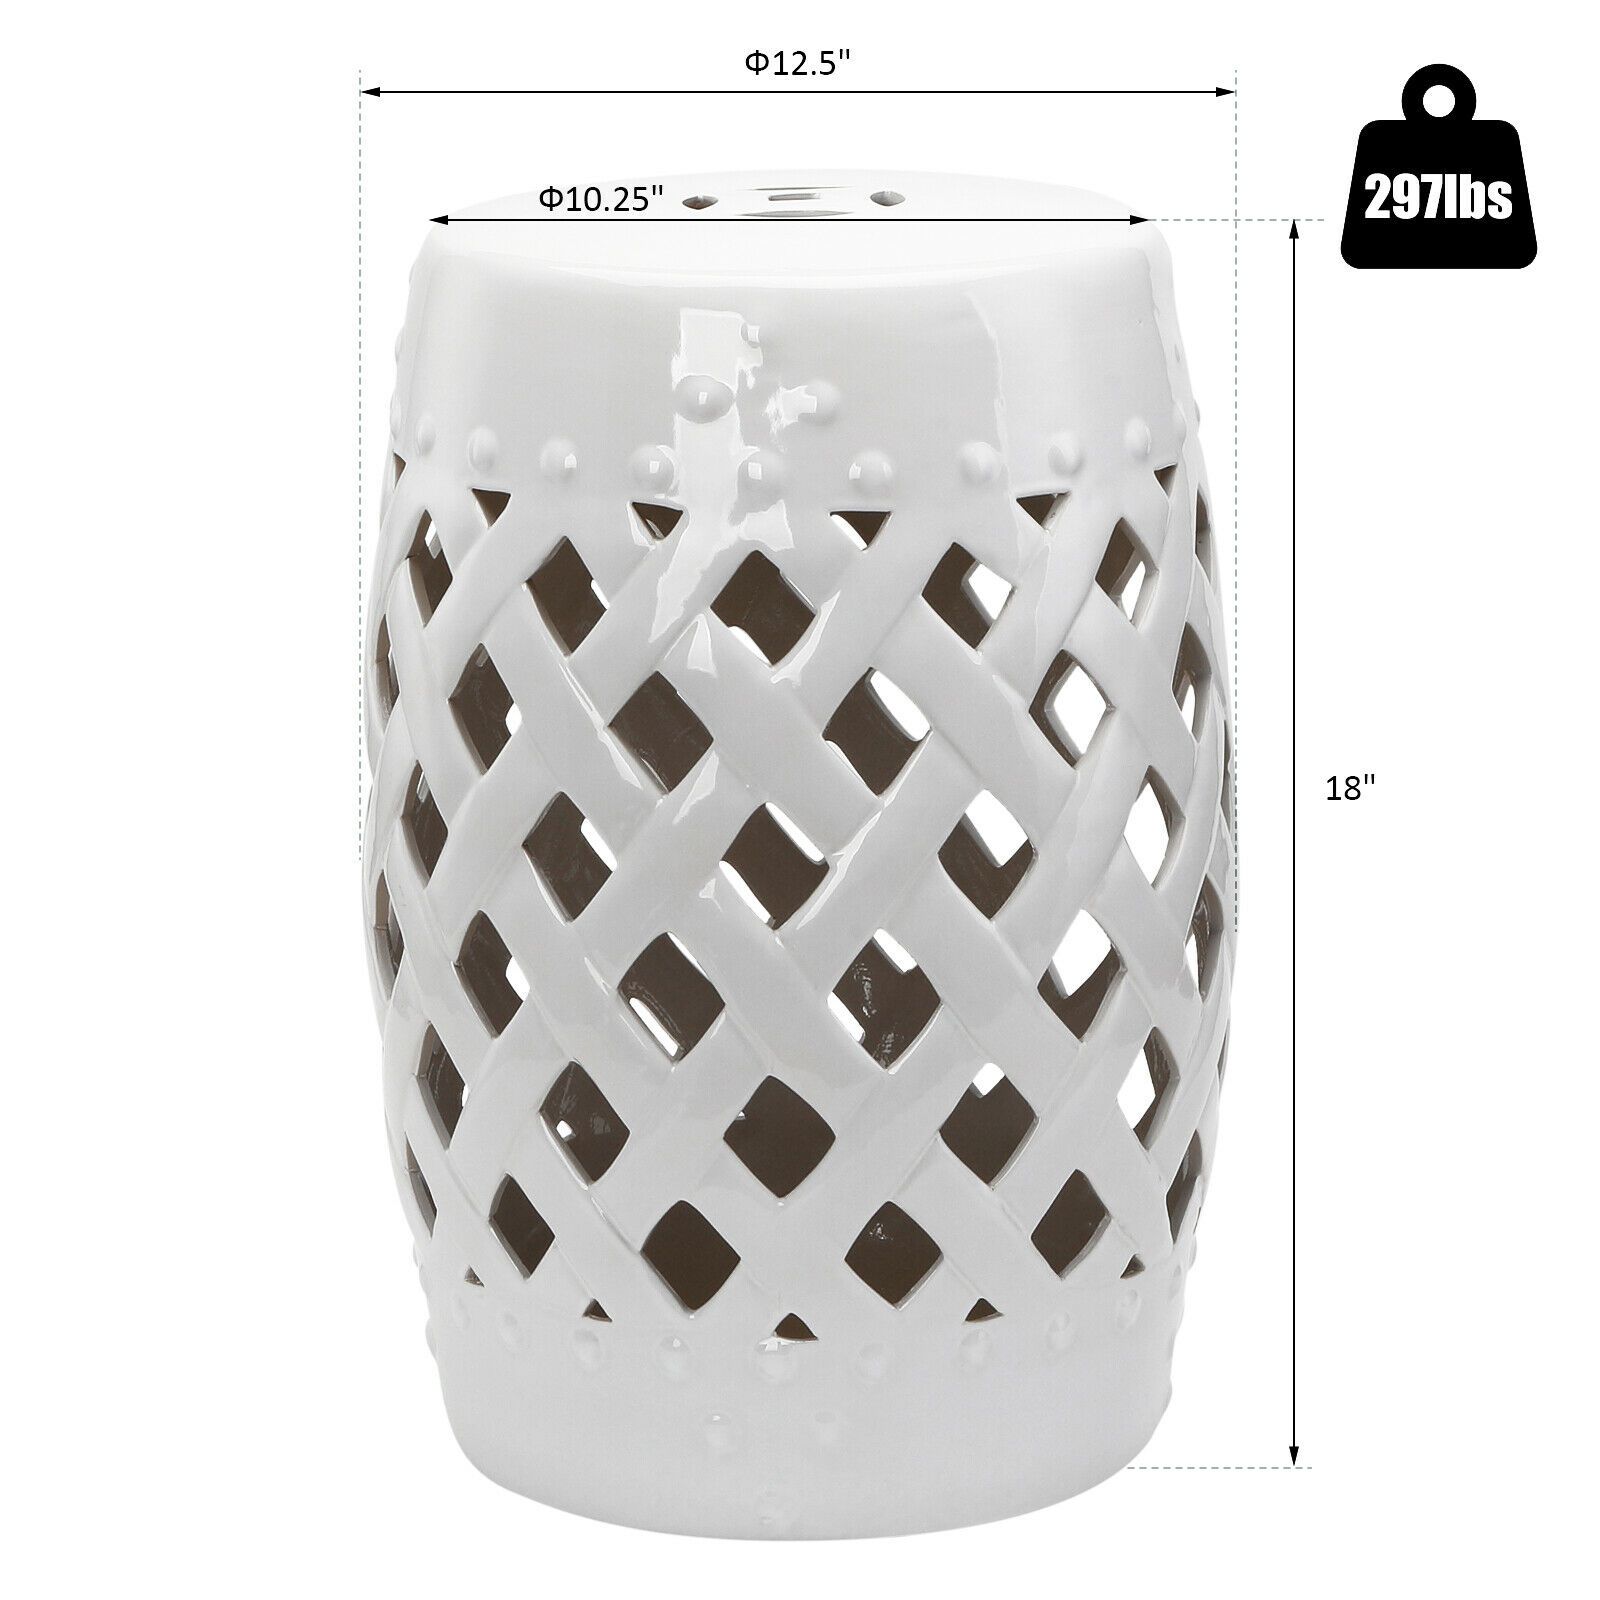 Outsunny Modern Ceramic Lattice Garden Stool Accent Table Decorative White Within Standwood Metal Garden Stools (View 13 of 25)